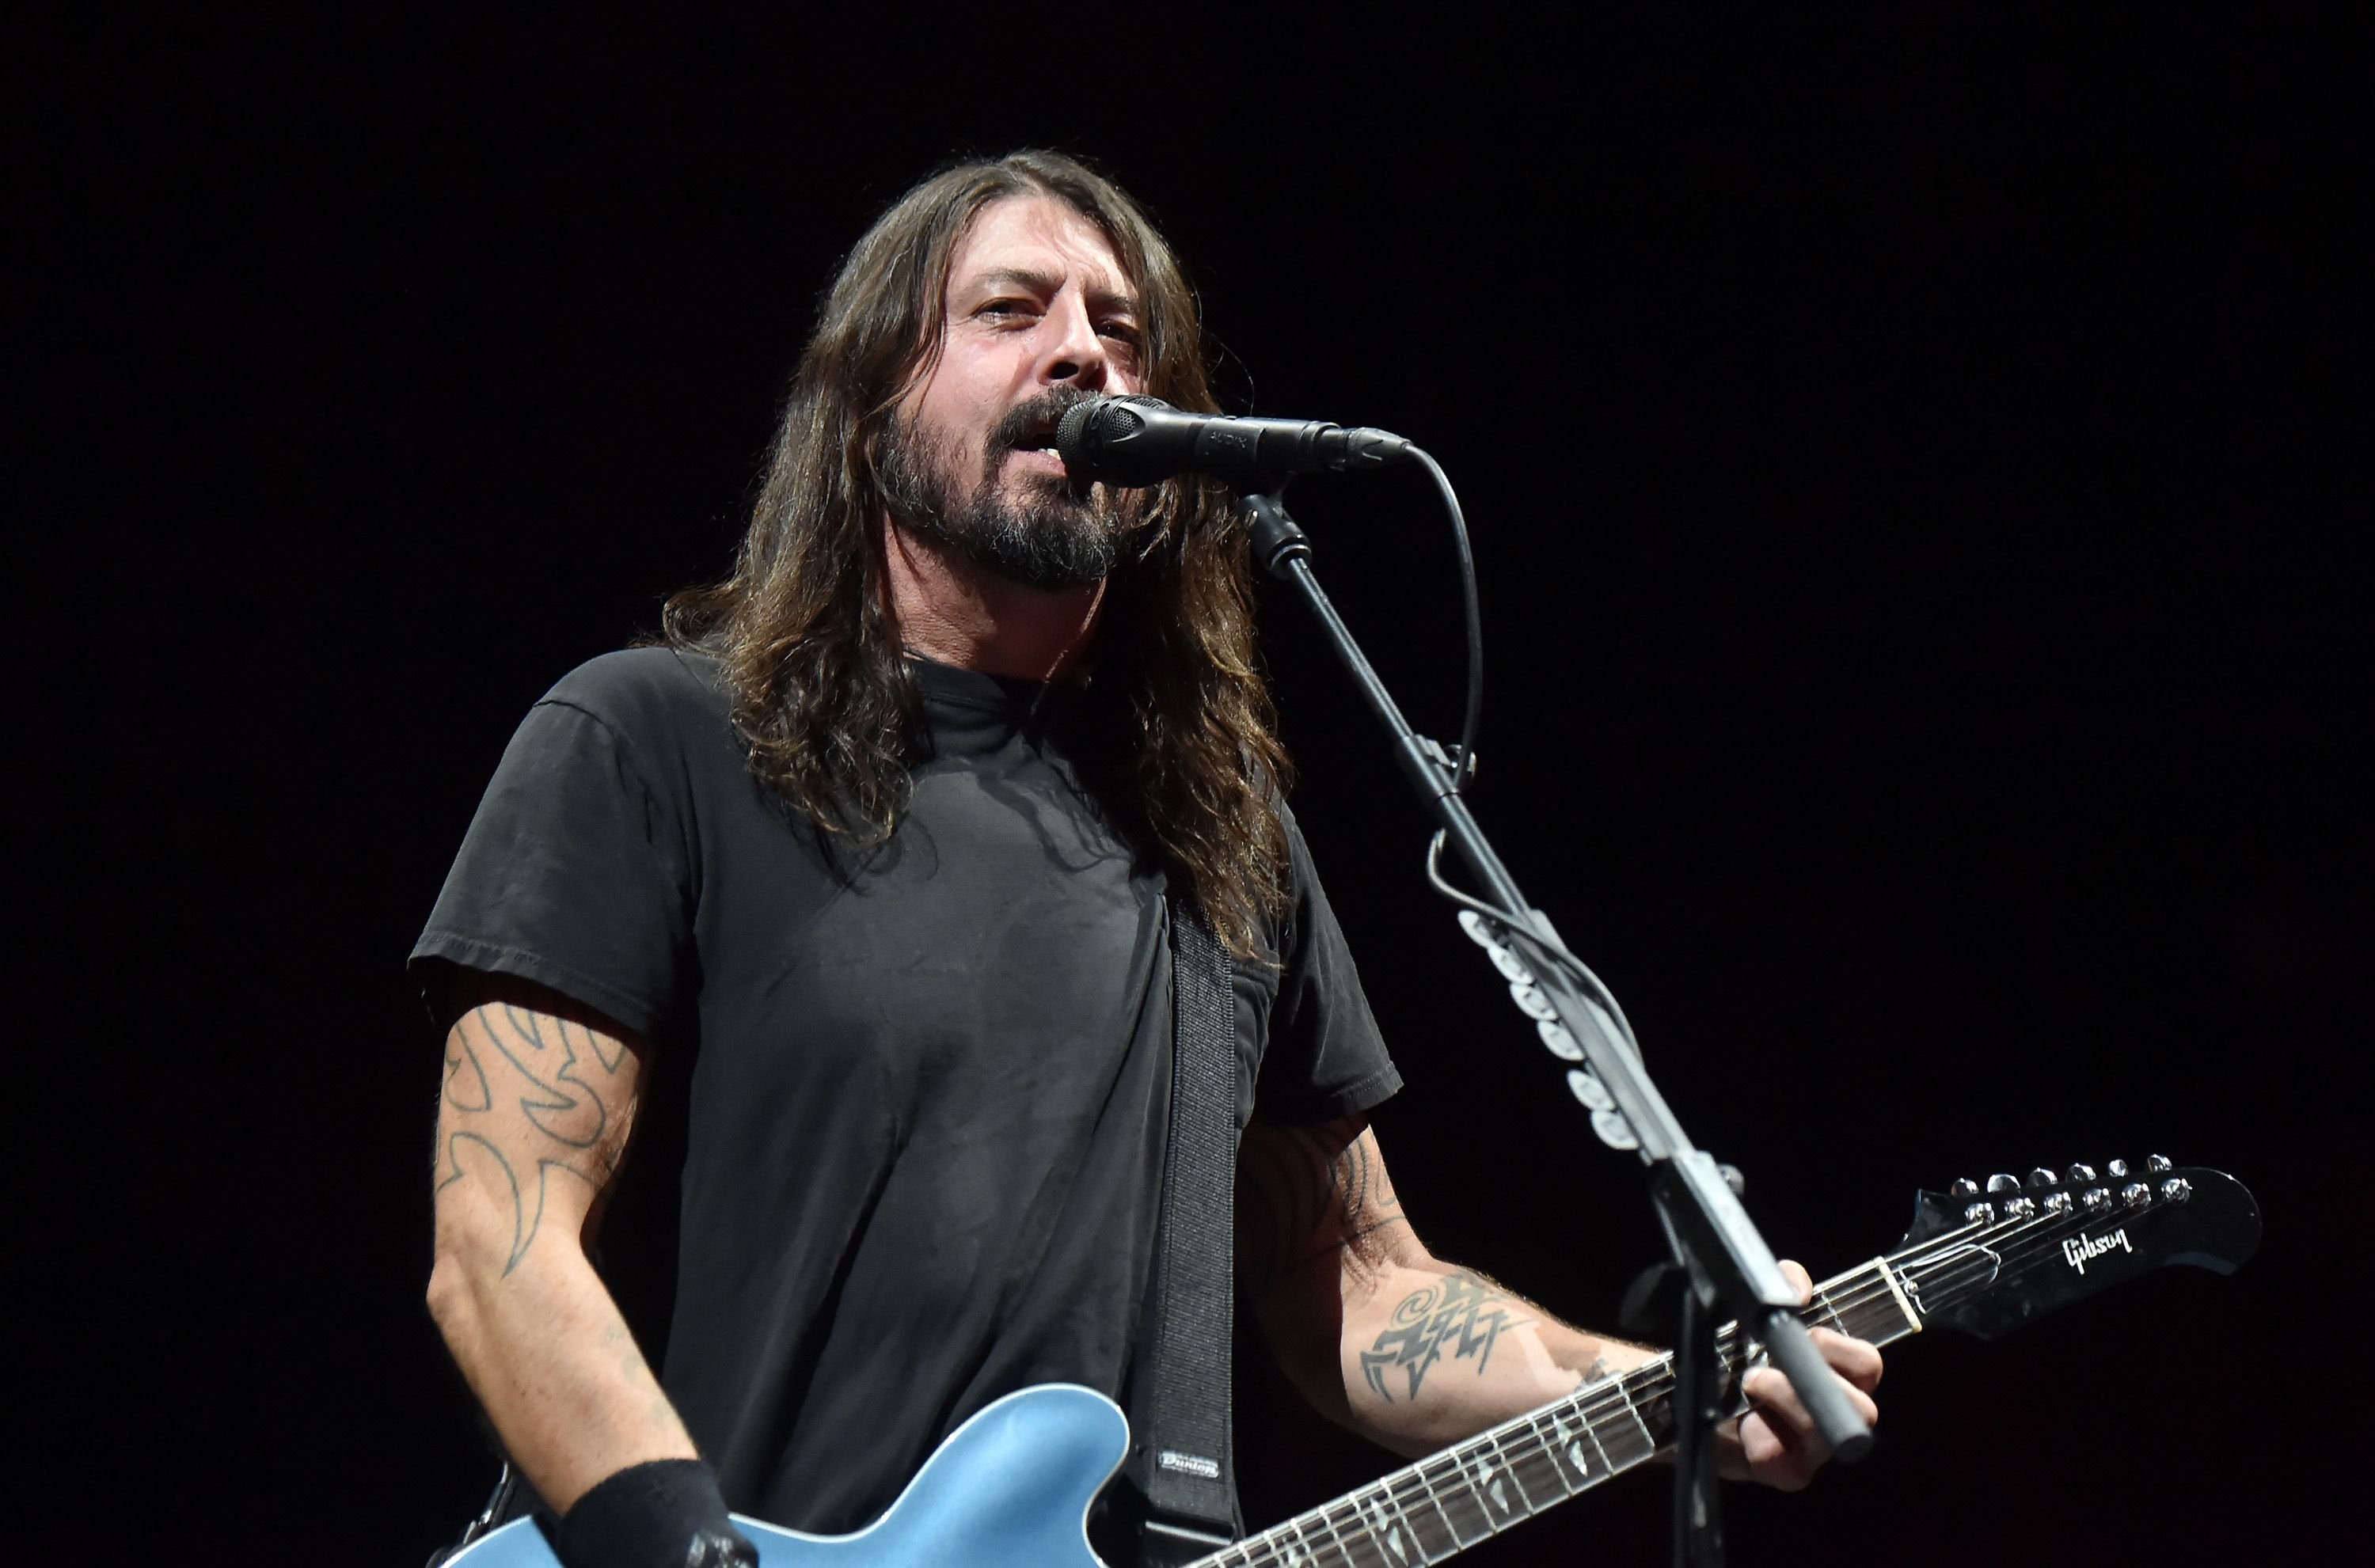 Dave Grohl of the Foo Fighters performs at Cal Jam on October 7, 2017 | Photo: Getty Images